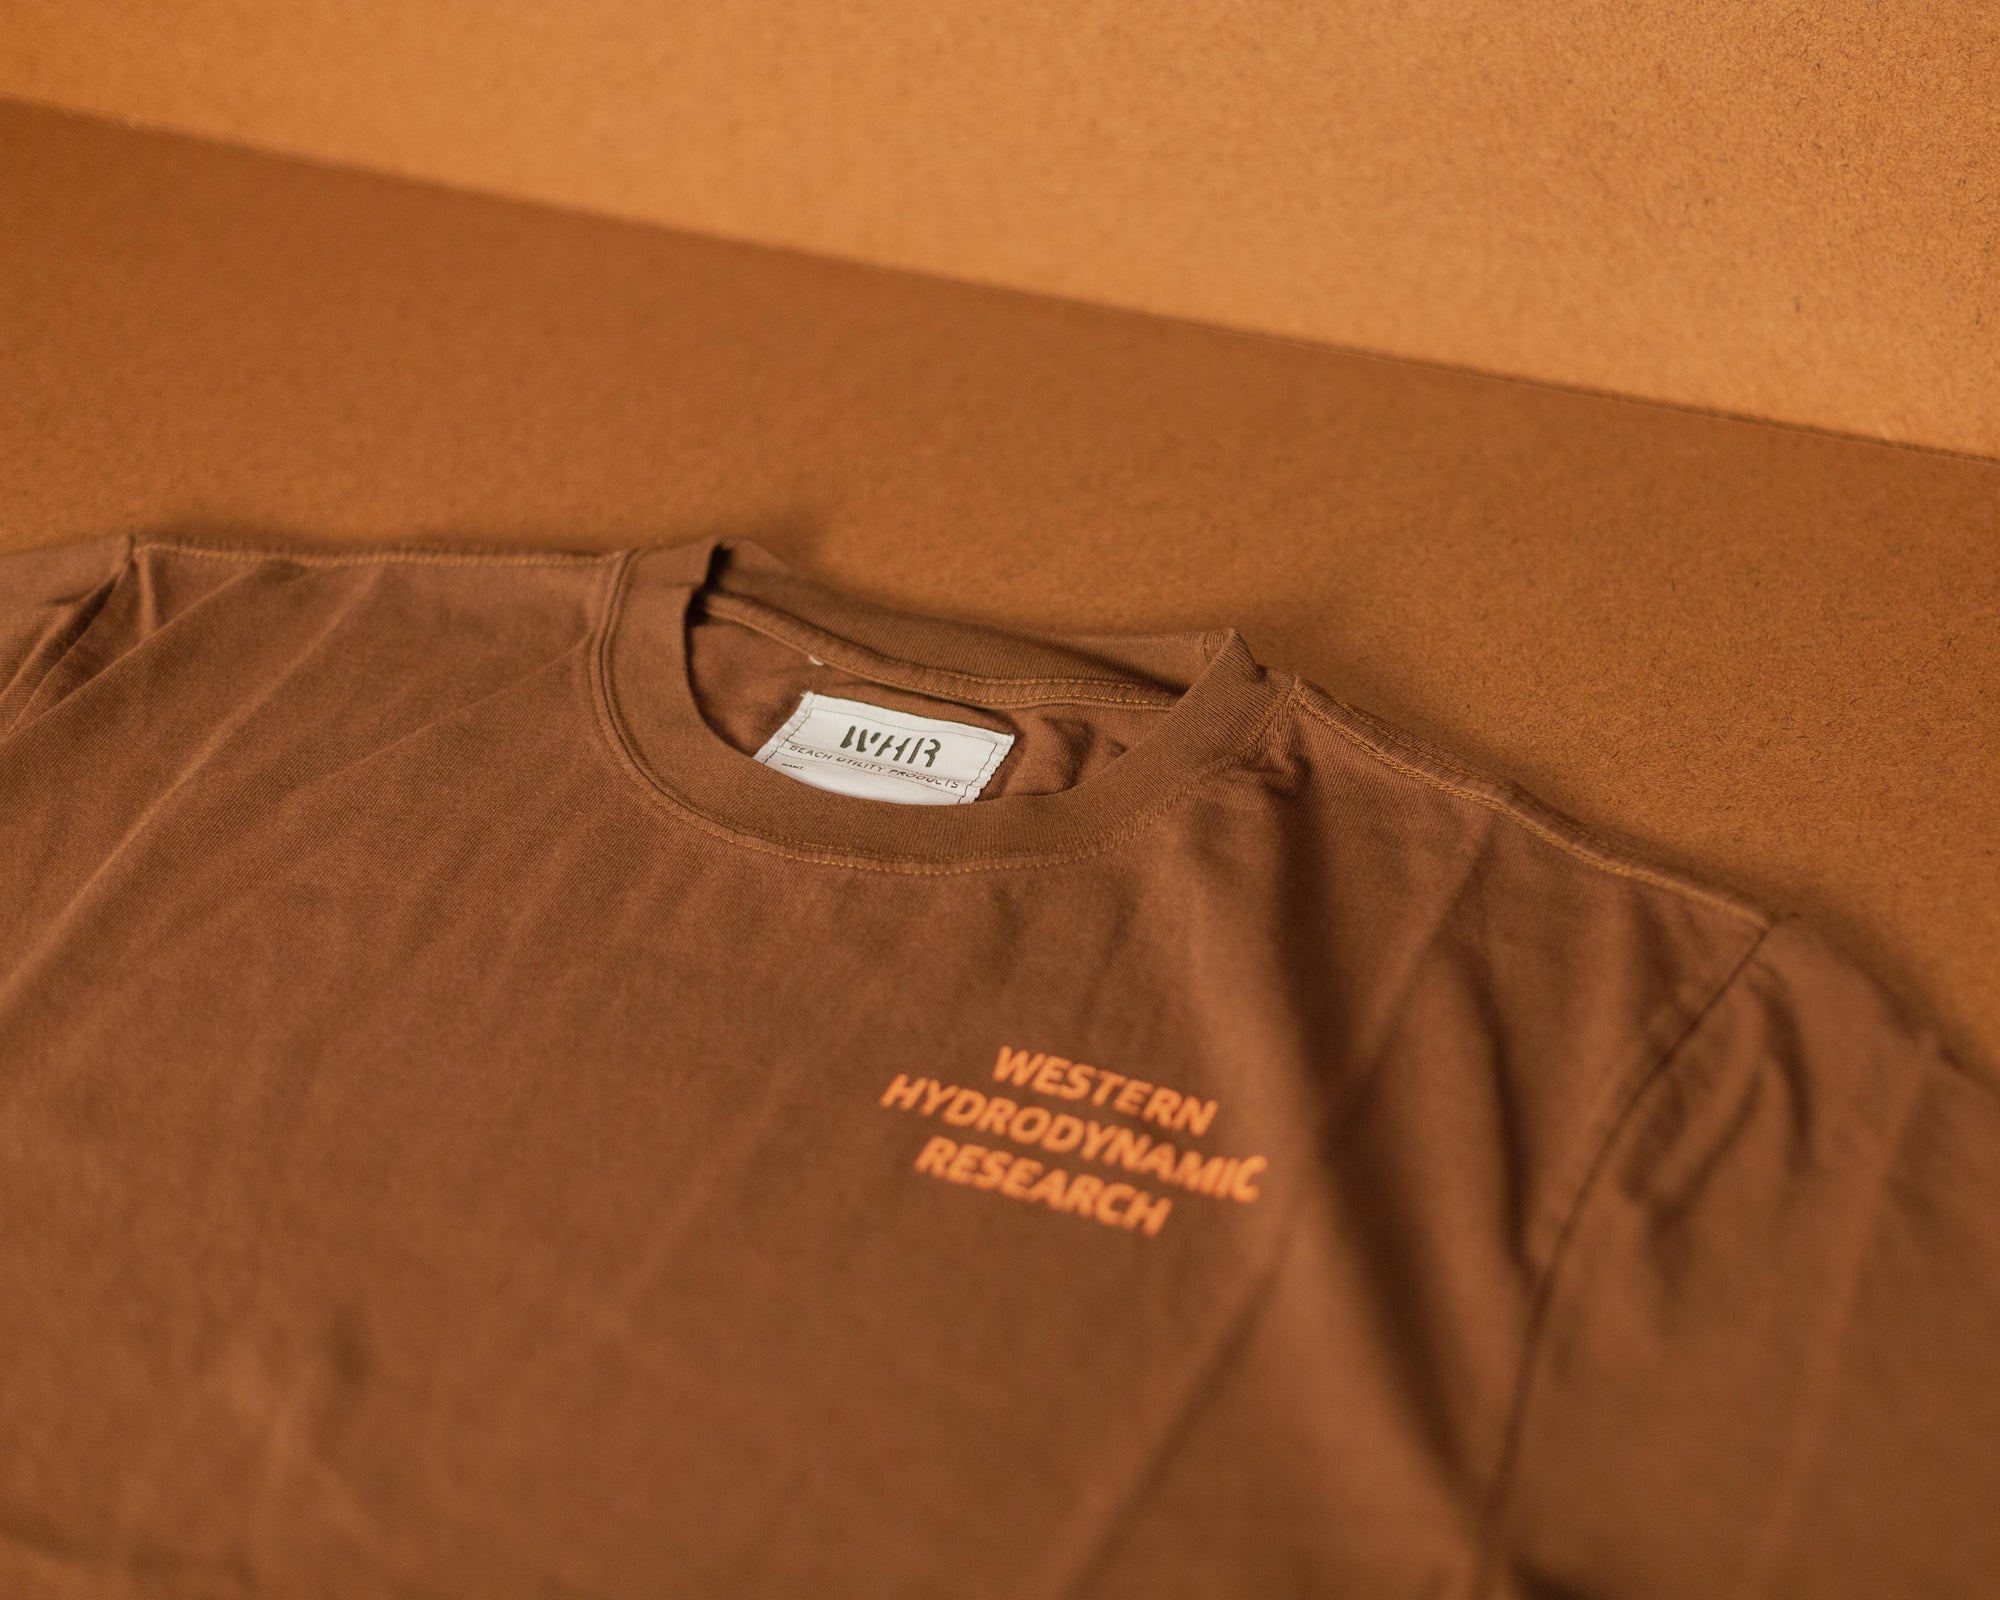 Western Hydrodynamic Research - Worker Tee (Brown) front with brown background